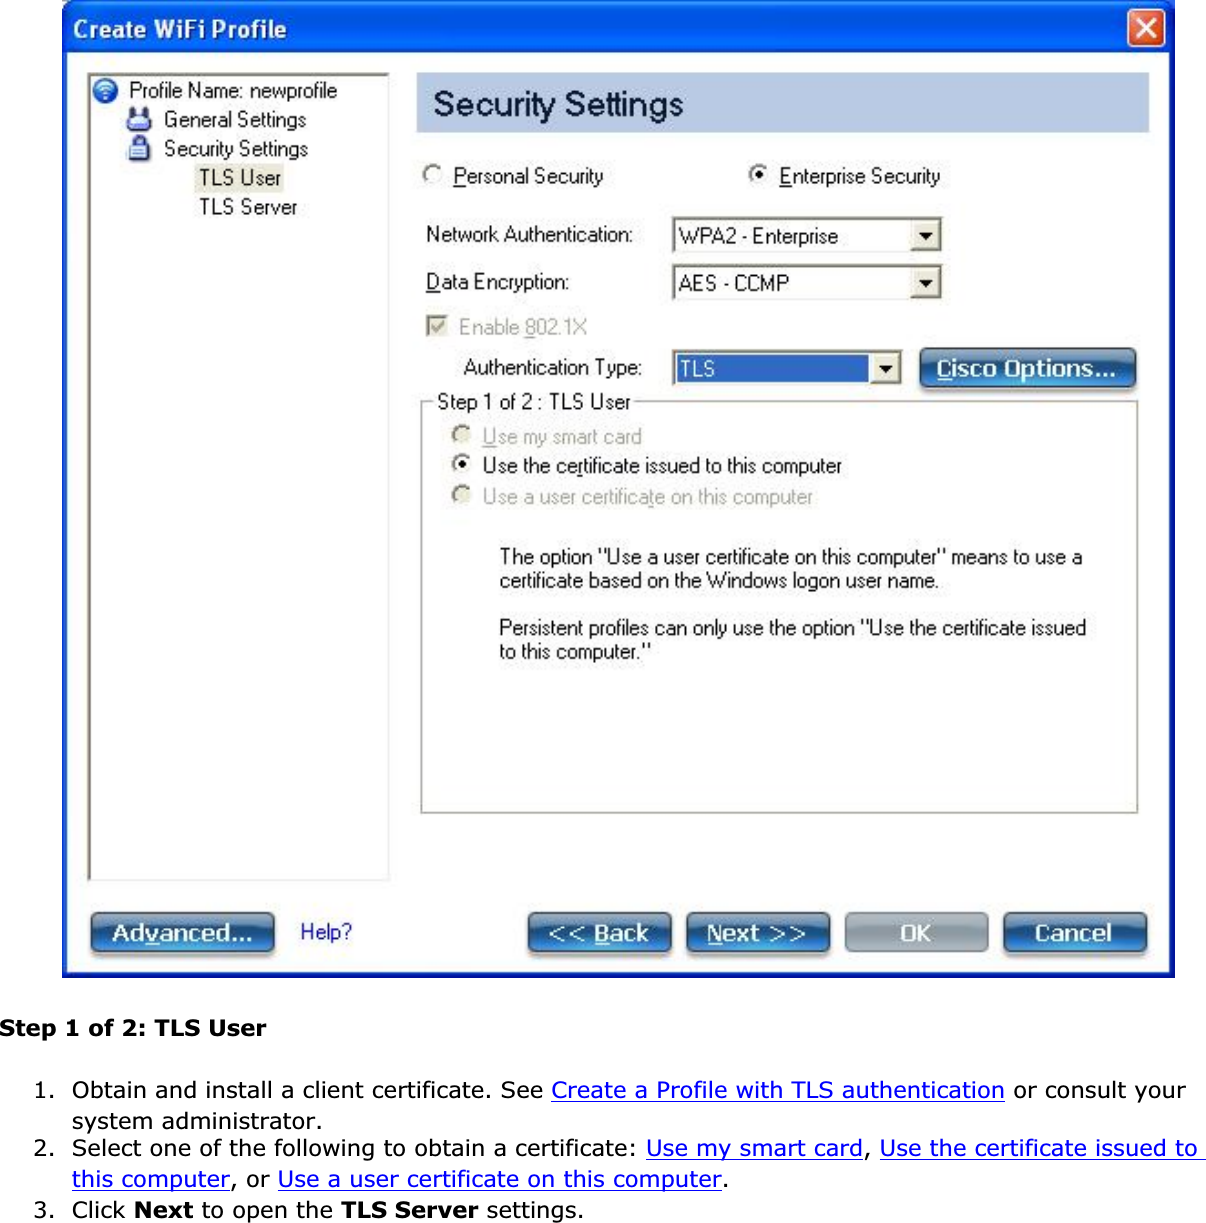 Step 1 of 2: TLS User1. Obtain and install a client certificate. See Create a Profile with TLS authentication or consult your system administrator.2. Select one of the following to obtain a certificate: Use my smart card,Use the certificate issued to this computer, or Use a user certificate on this computer.3. Click Next to open the TLS Server settings.